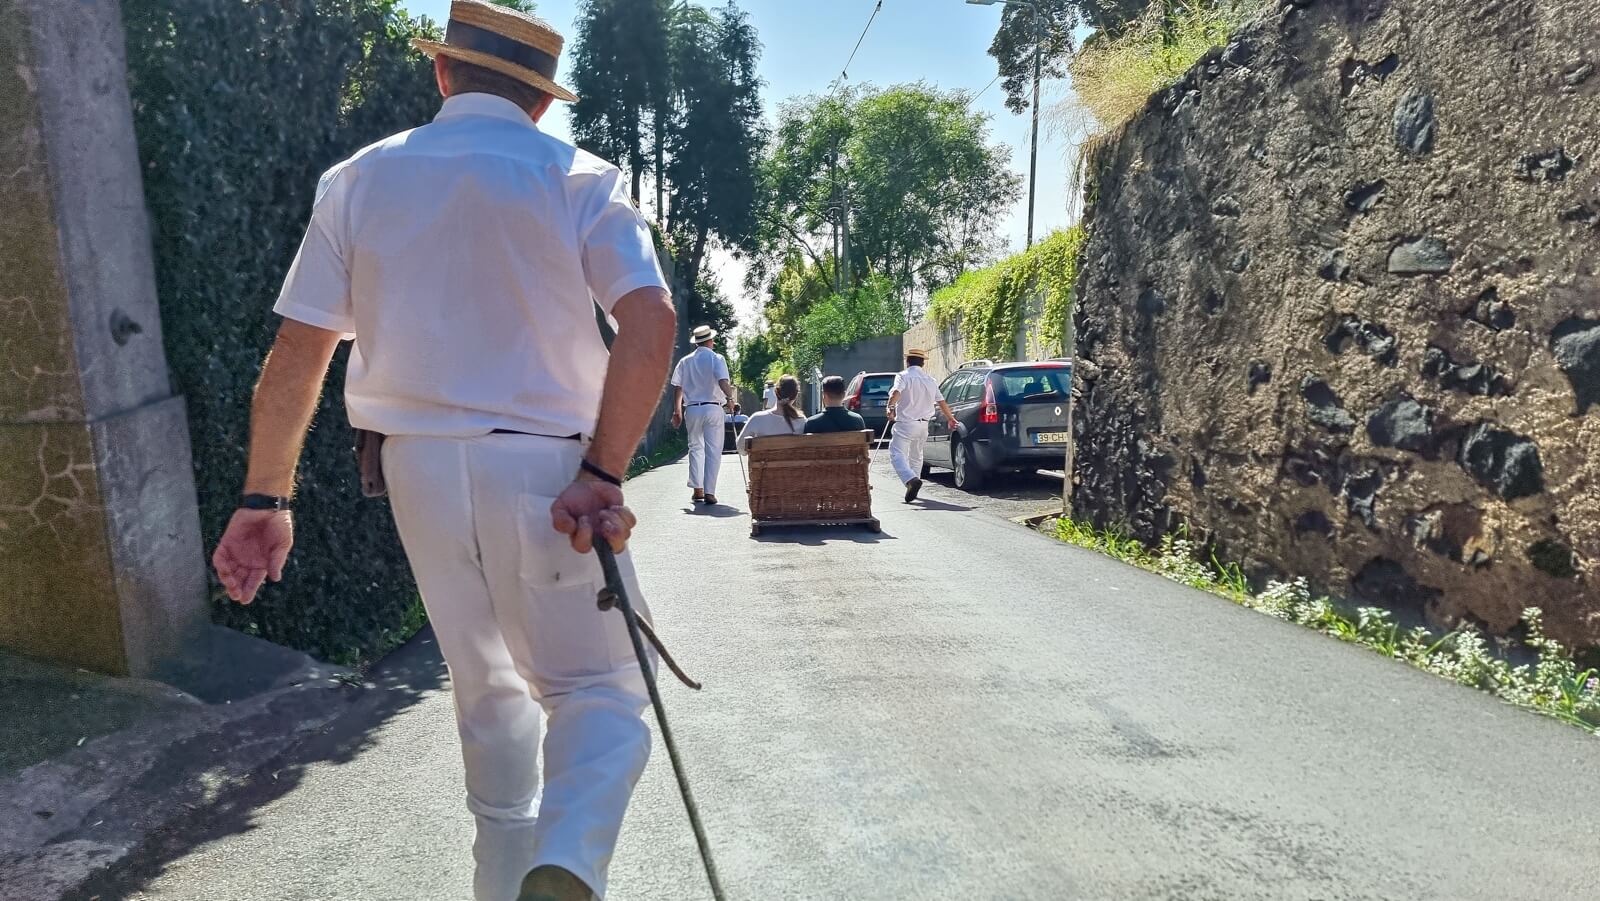 The True Flavours & Natural Beauty of Madeira Islands - Sledge getting pulled down the road